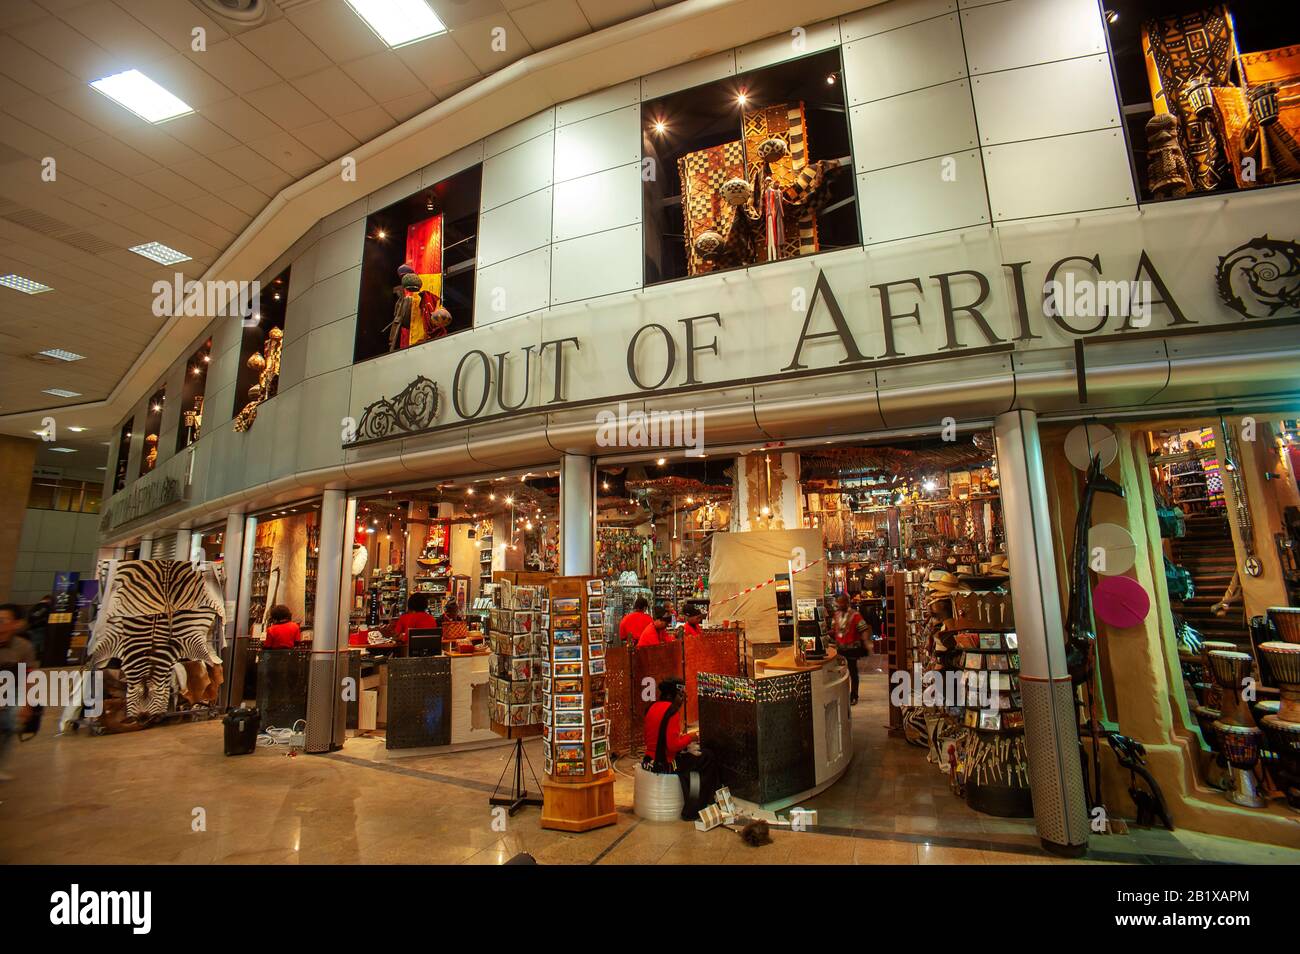 Out Of Africa famous shop at the Duty Free Shop area of O. R. Tambo International Airport, Johannesburg, South Africa Stock Photo